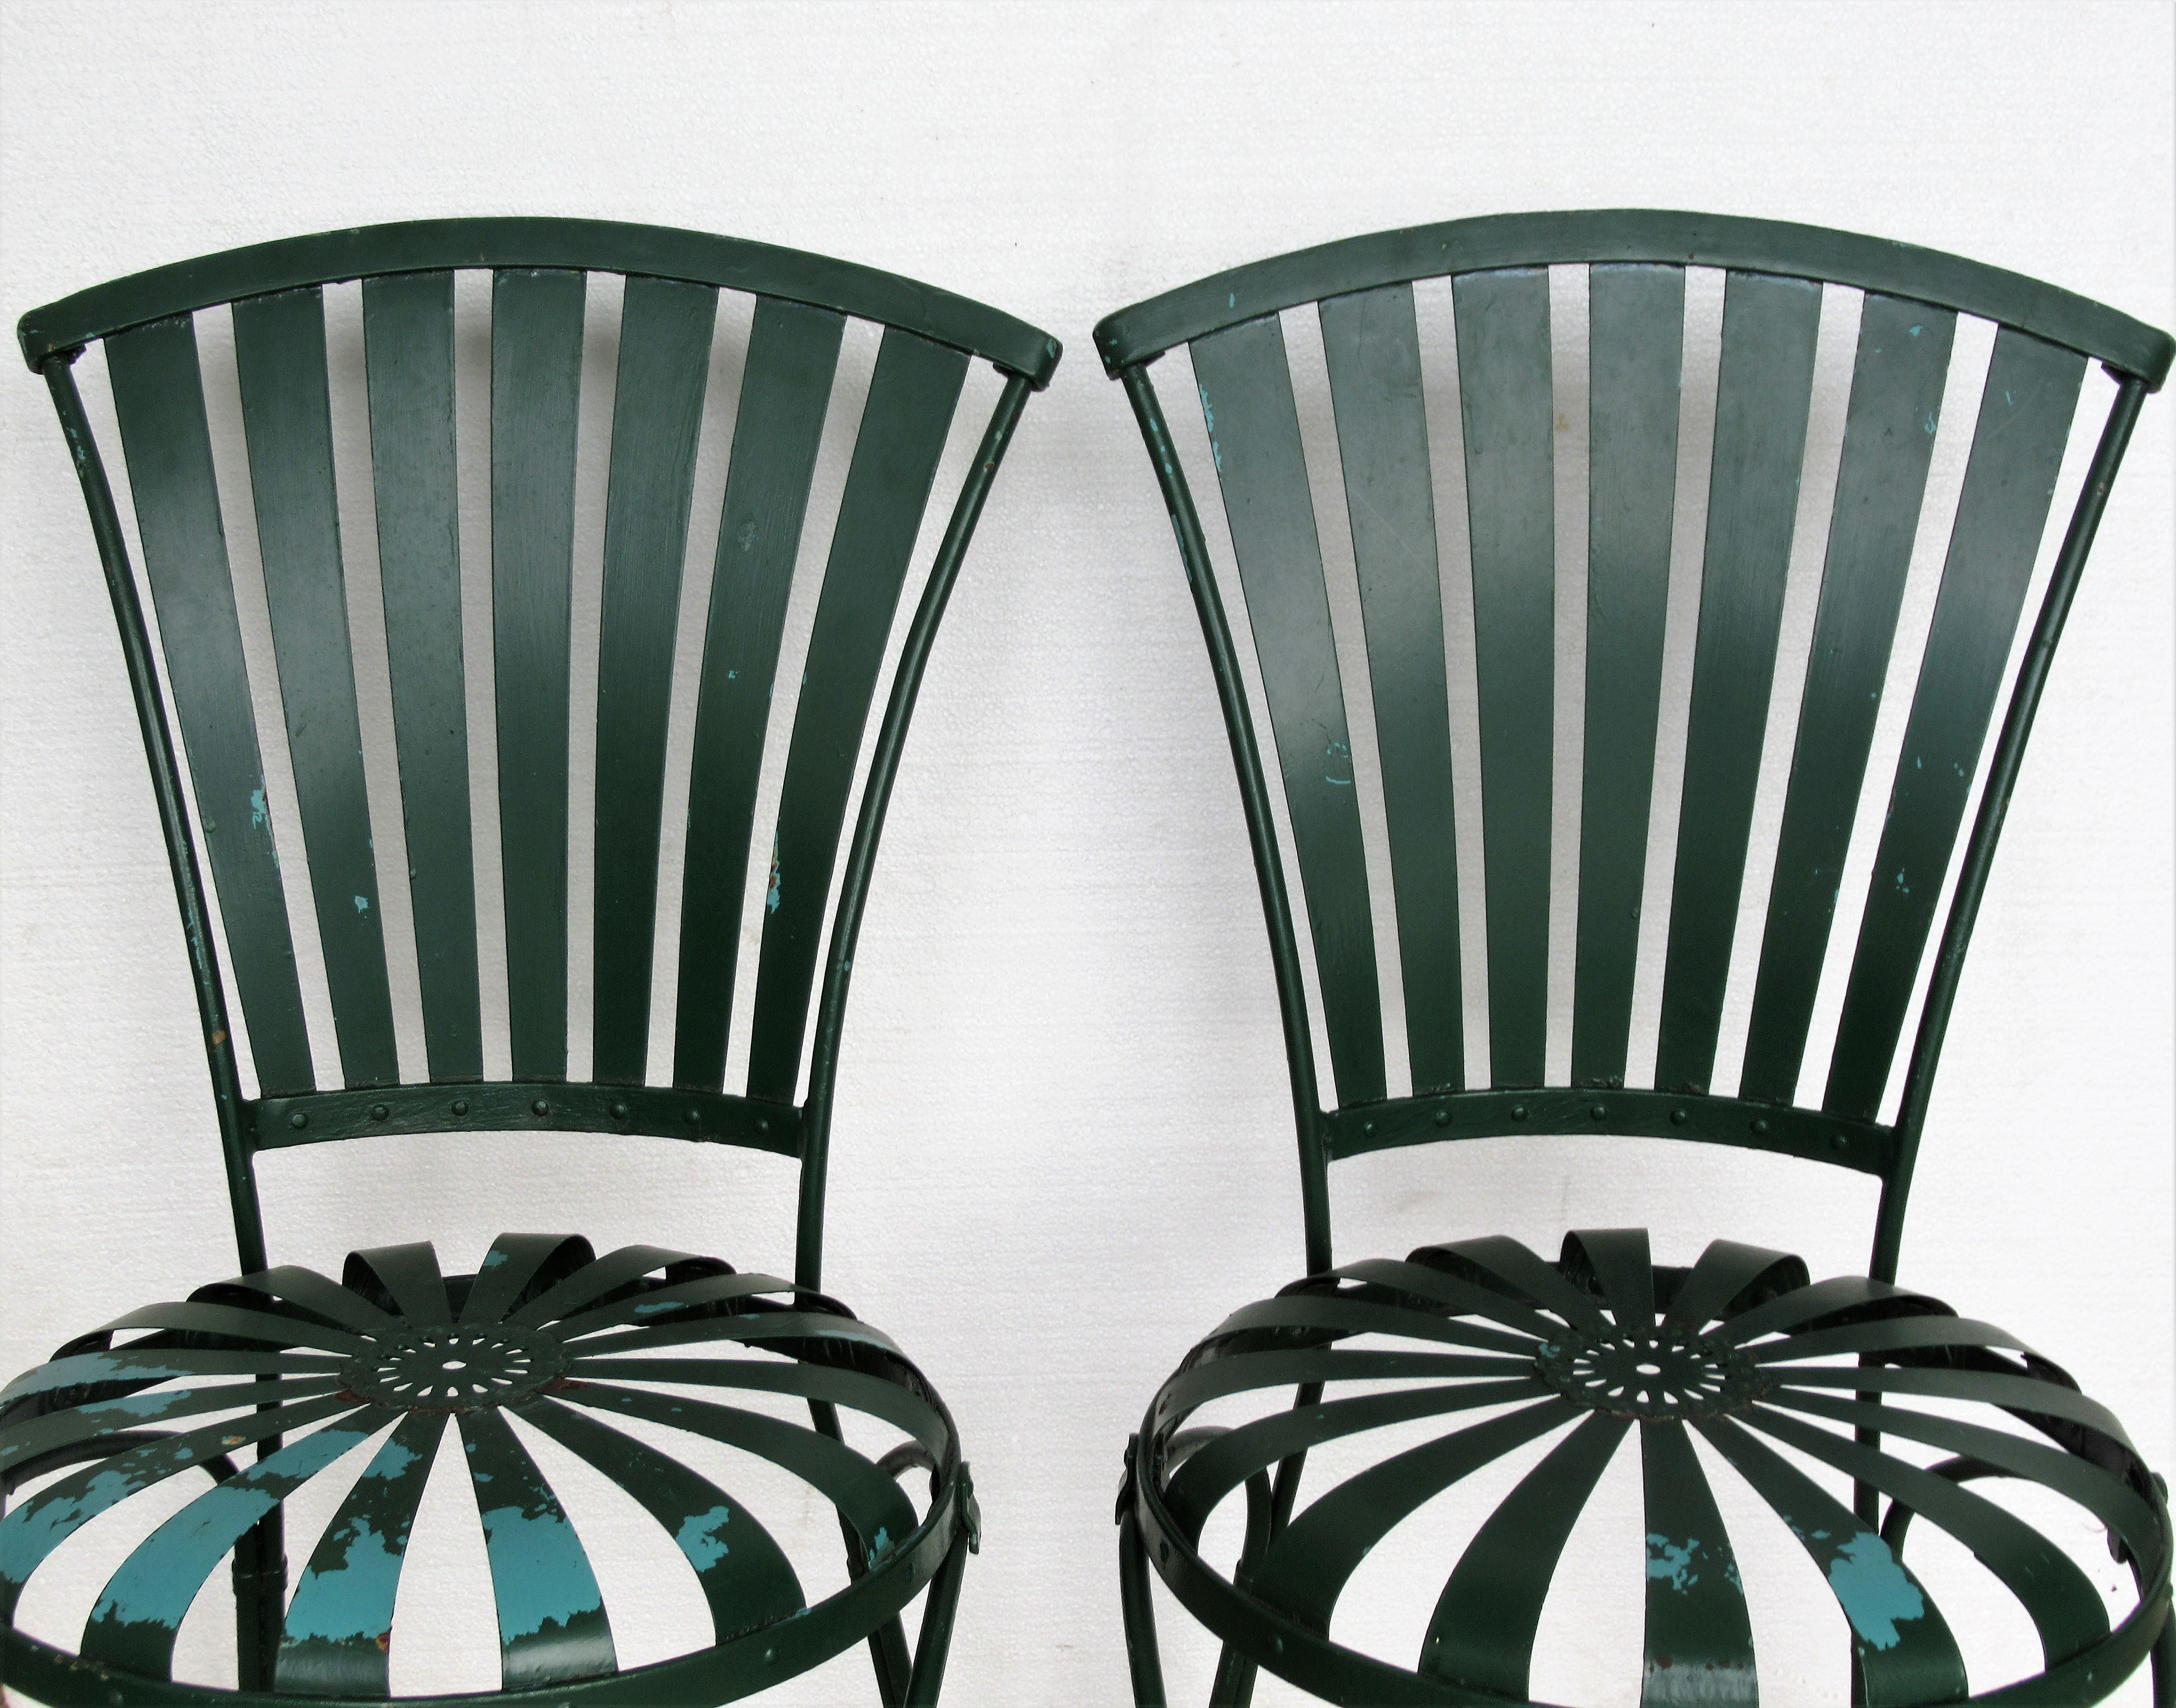  Spring Steel Garden Table and Chairs by Francois Carre 10